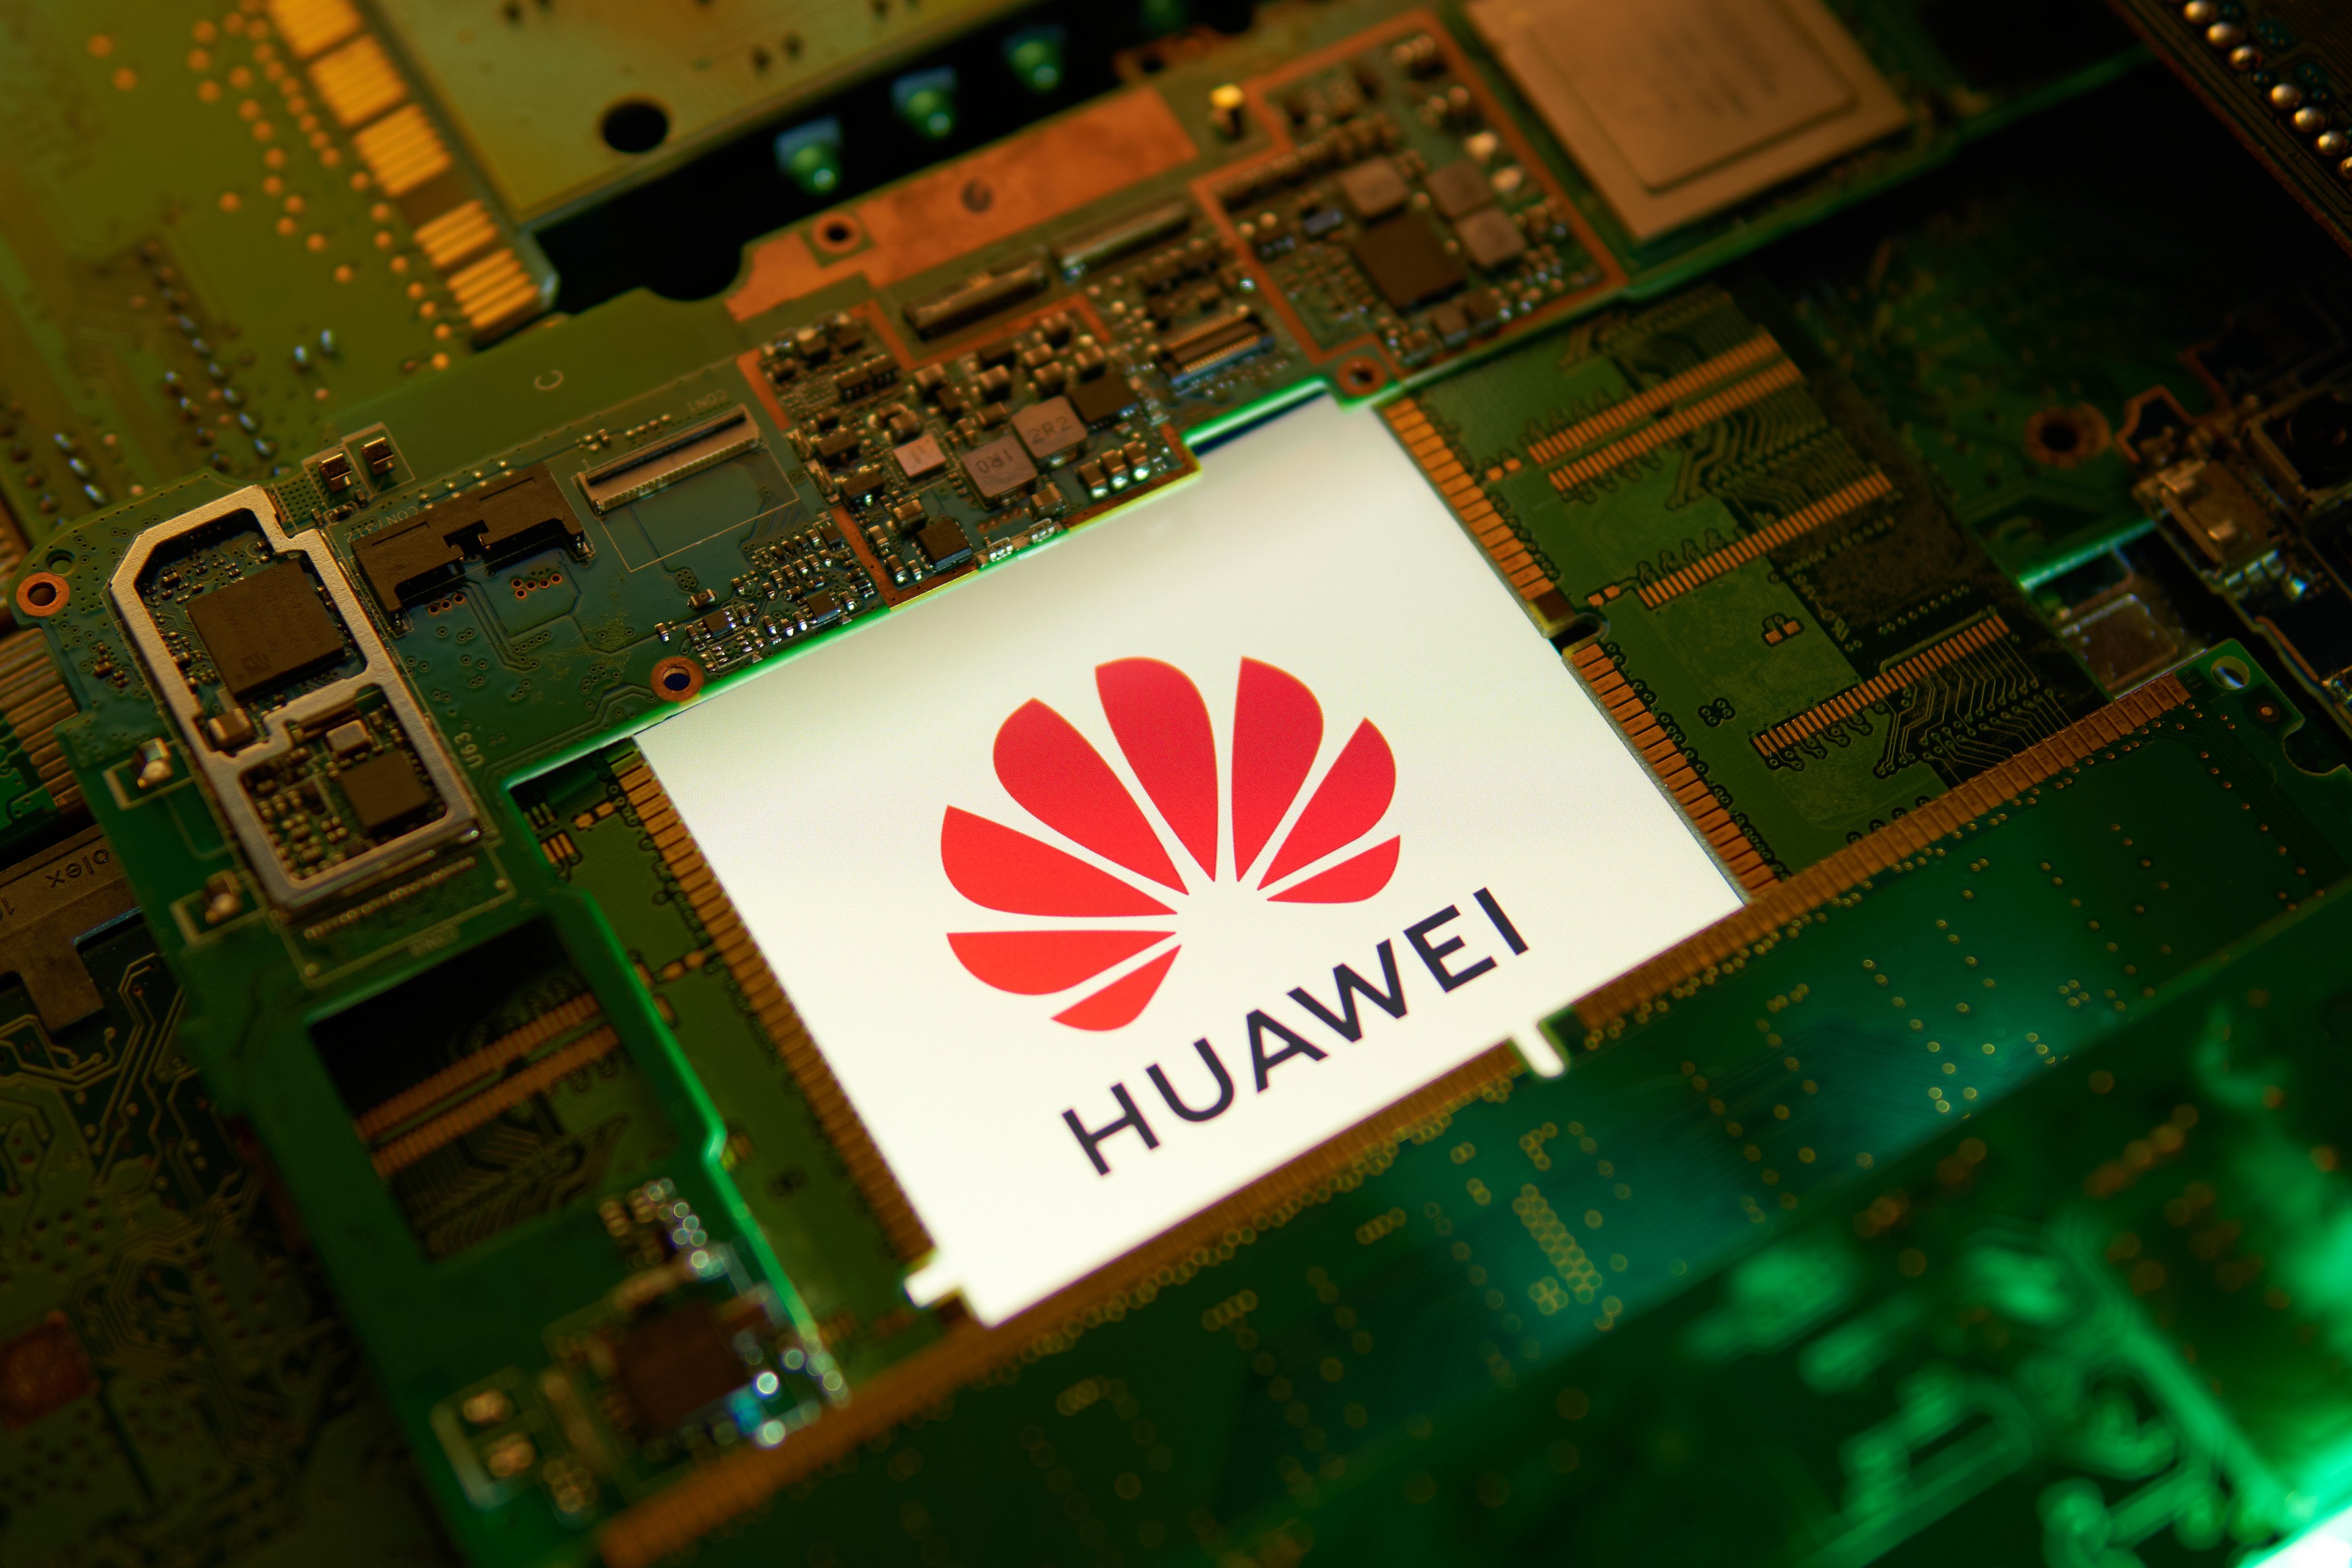 Chinese firms must develop semiconductors based on home-developed technologies that are free from US tech restrictions, according to Huawei Technologies deputy chairman Eric Xu Zhijun. Image: Shutterstock